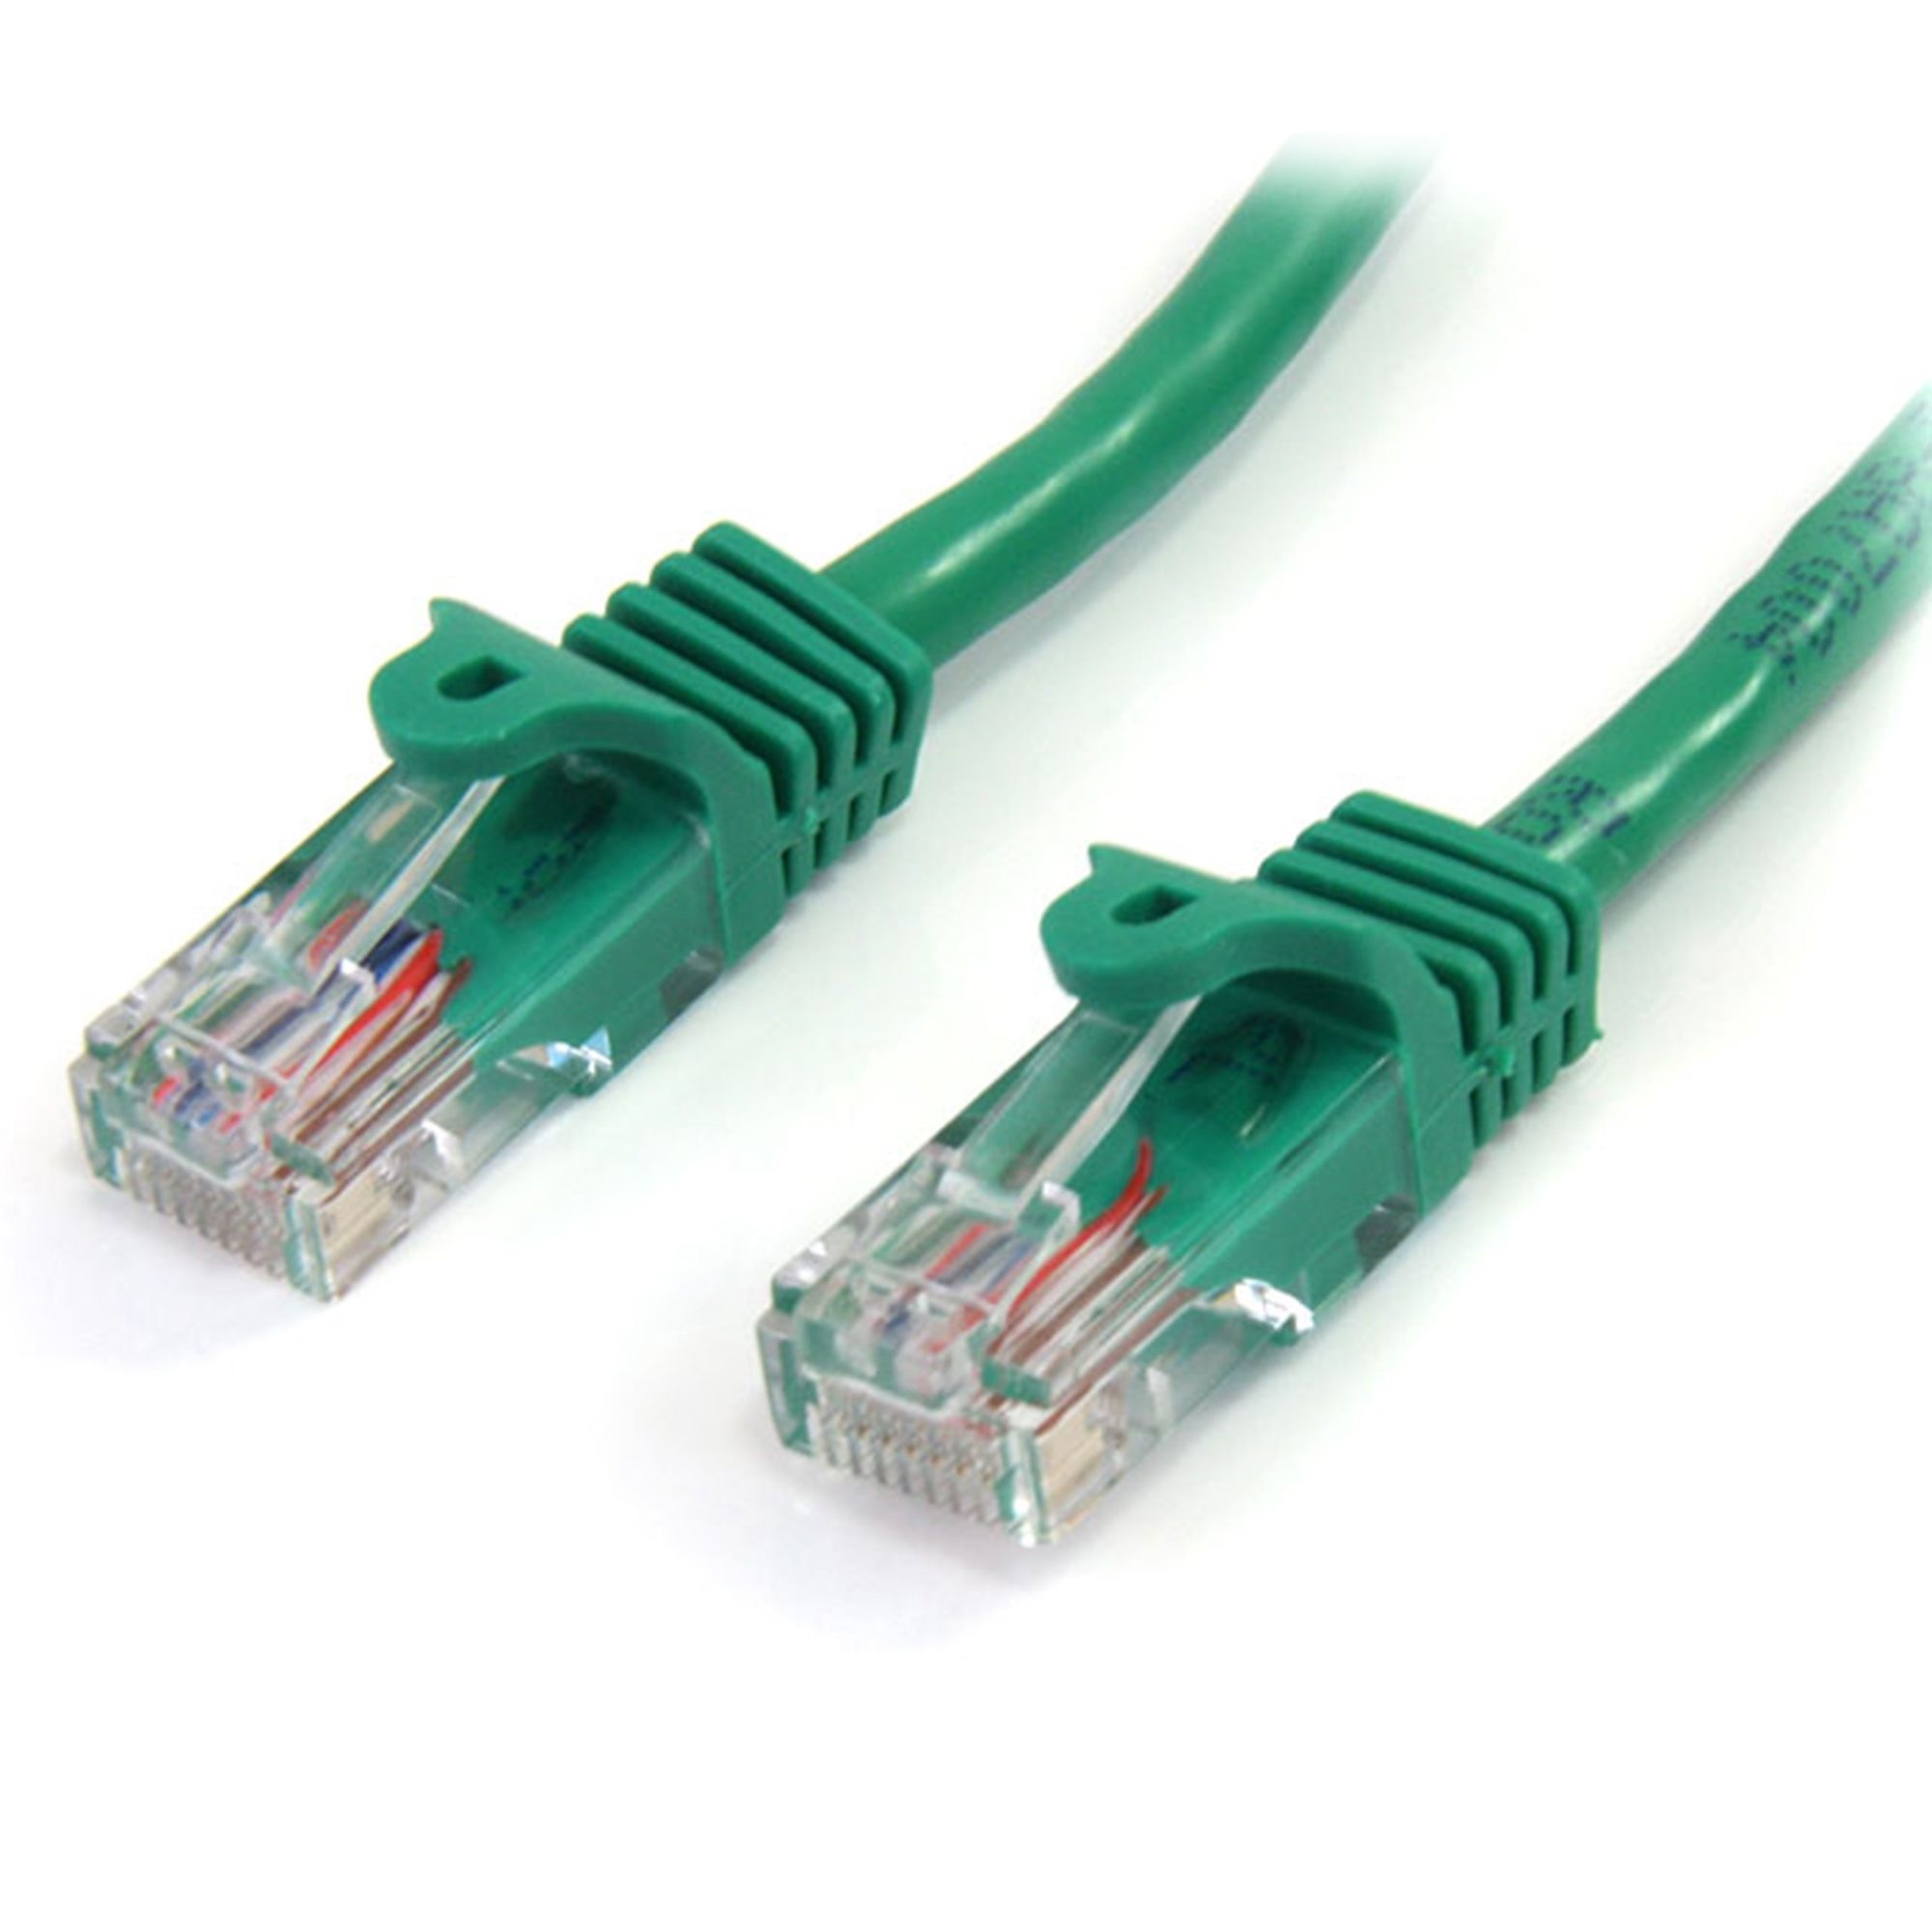 StarTech Snagless UTP Cat5e Patch Cable (Green, 1m)